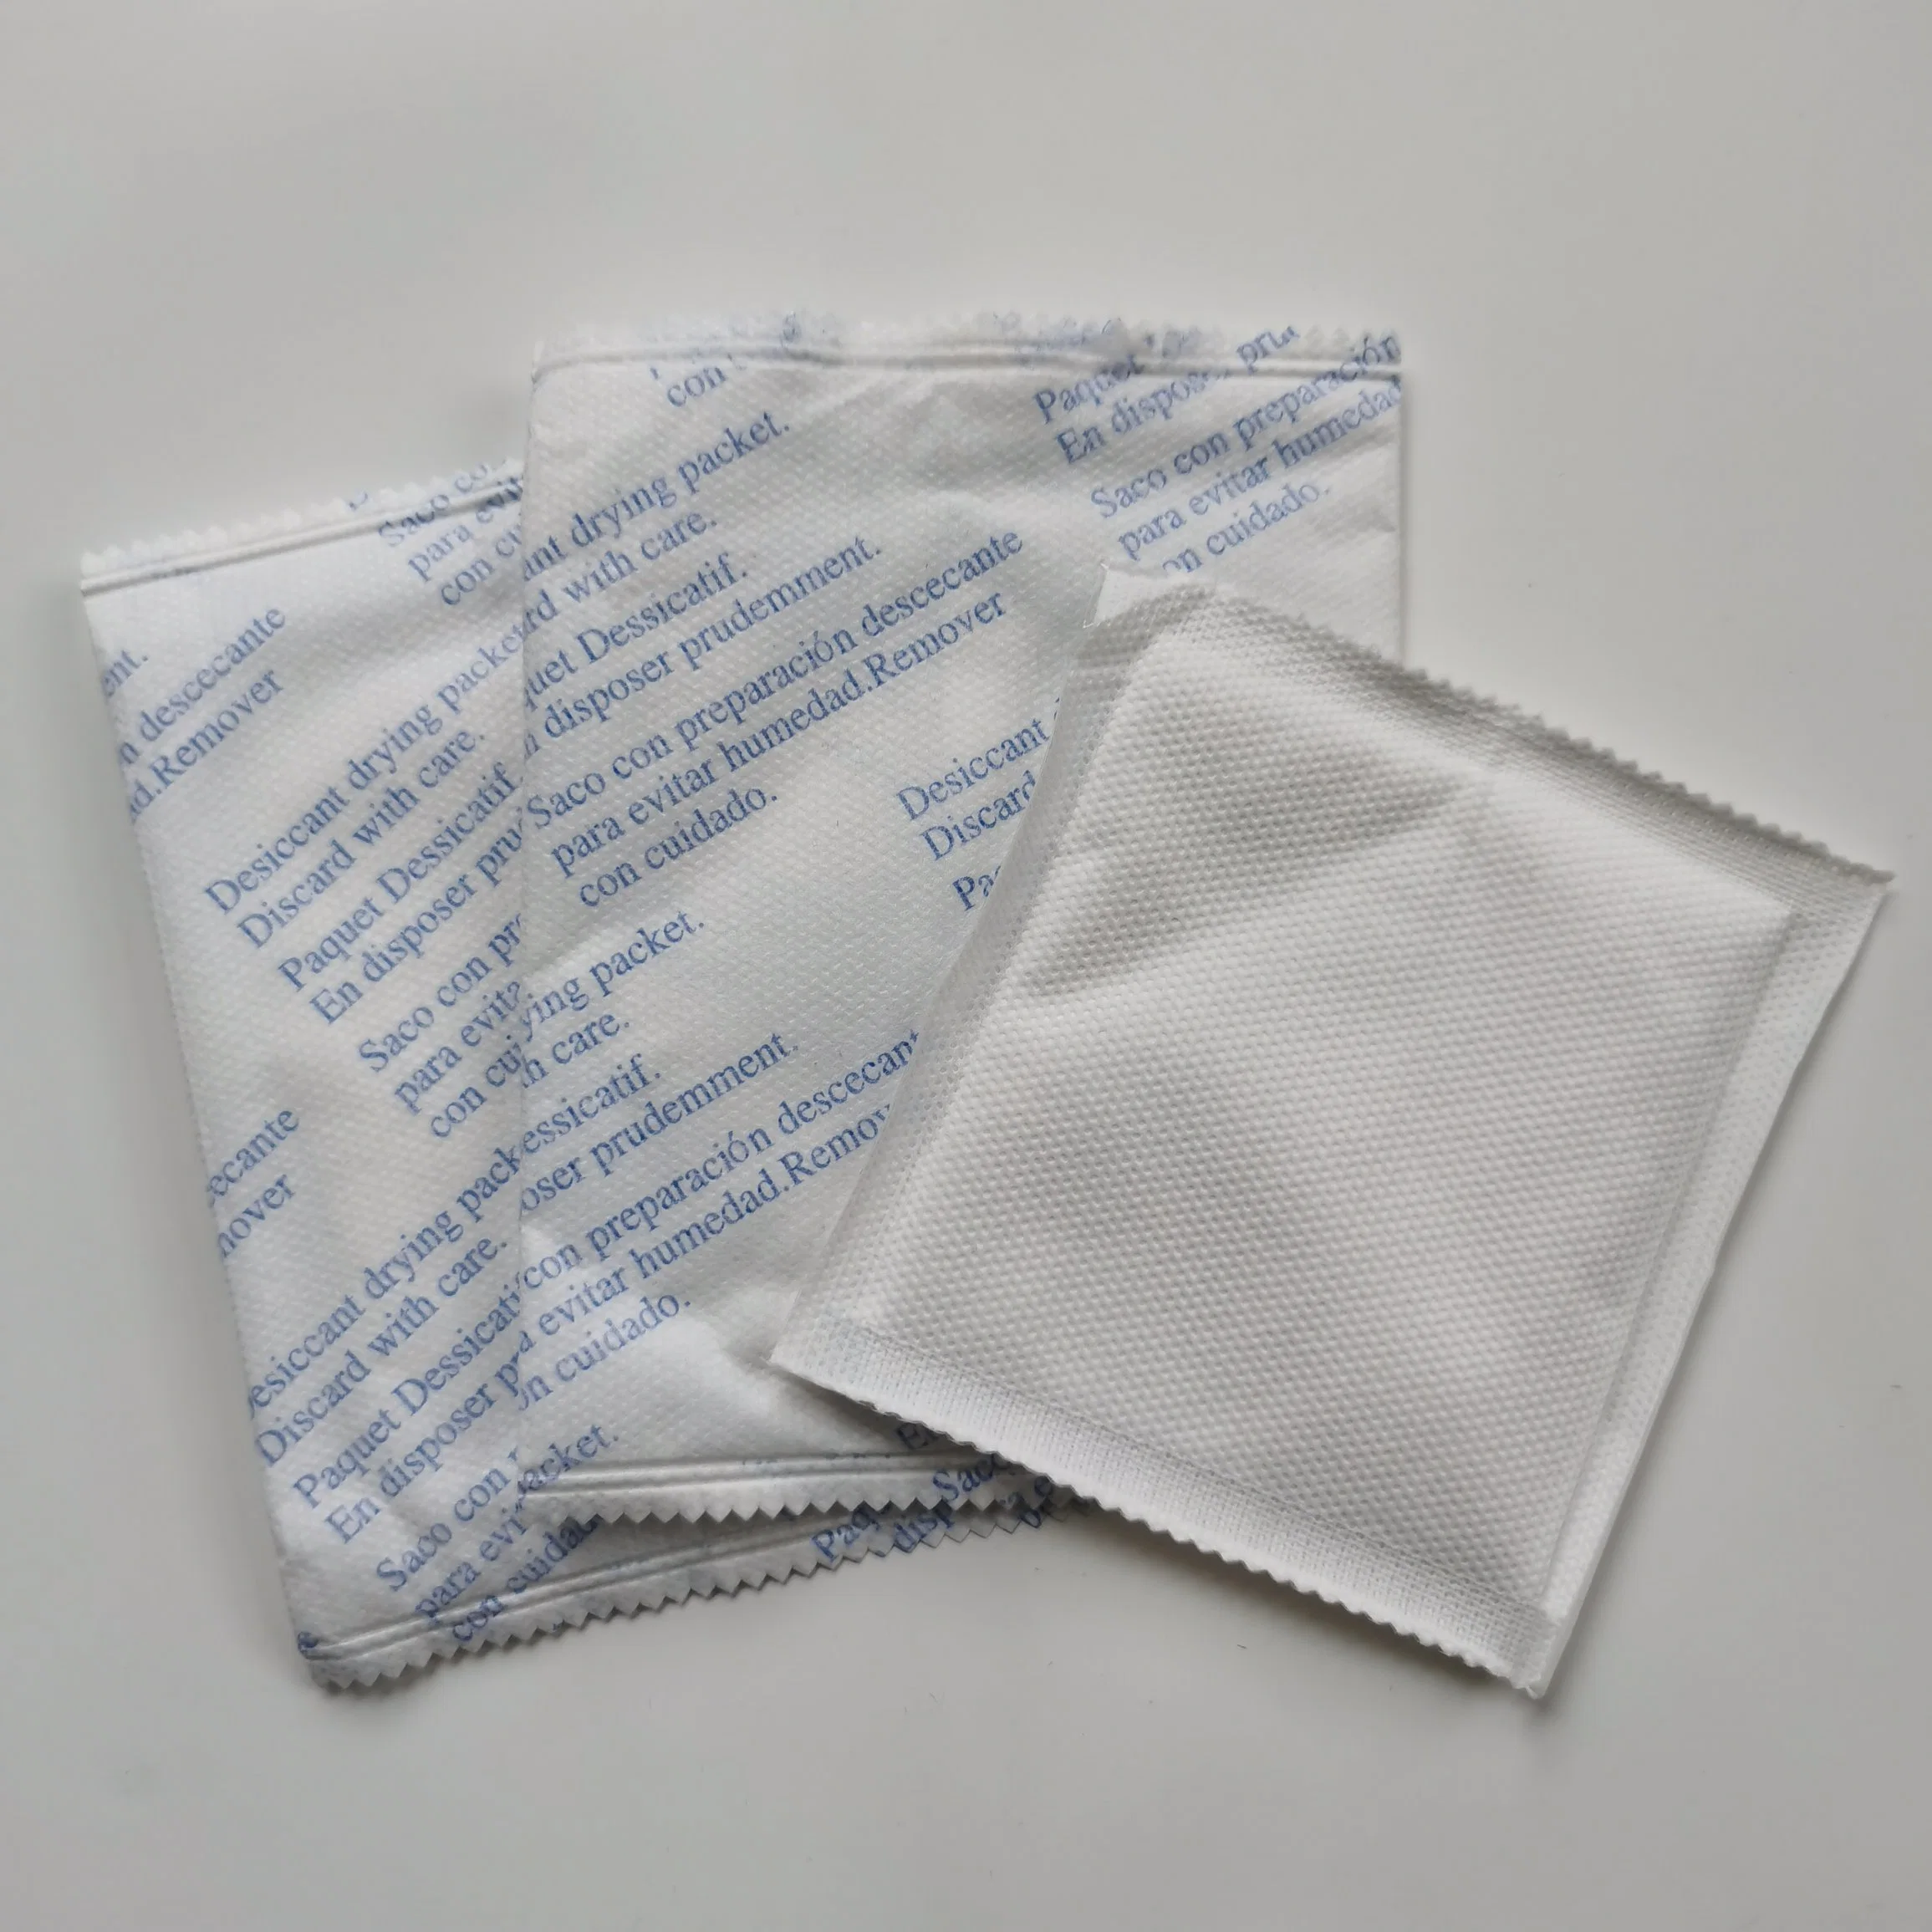 25g 300% Efficient Cacl2 Calcium Chloride Super Dry Desiccant for Textile Packaging